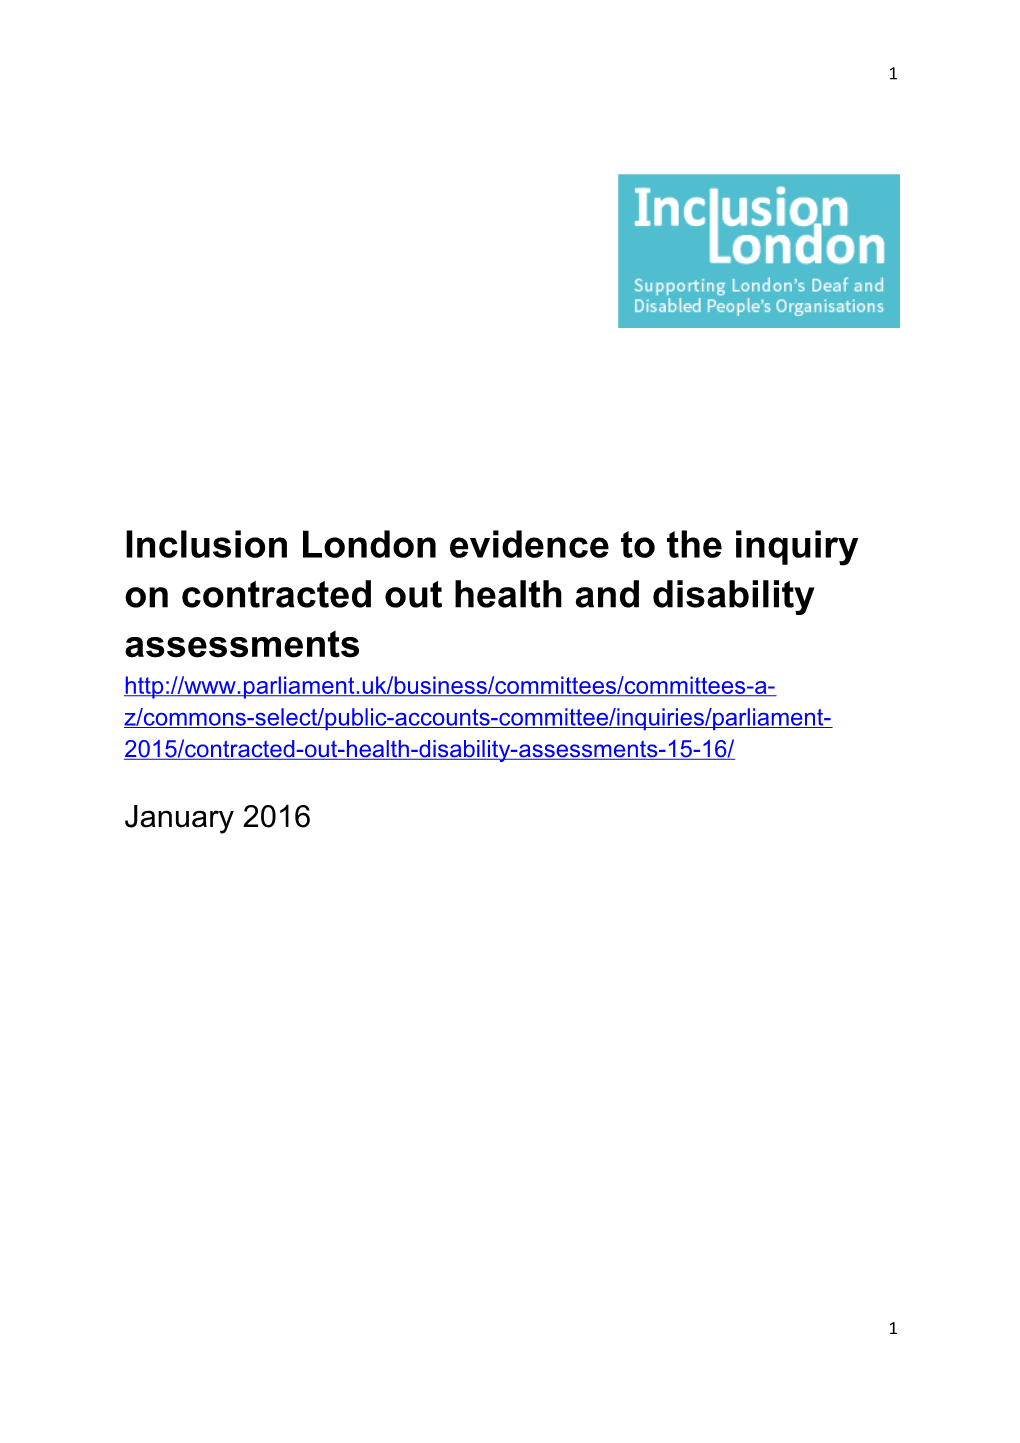 Inclusion London Evidence to the Inquiry on Contracted out Health and Disability Assessments